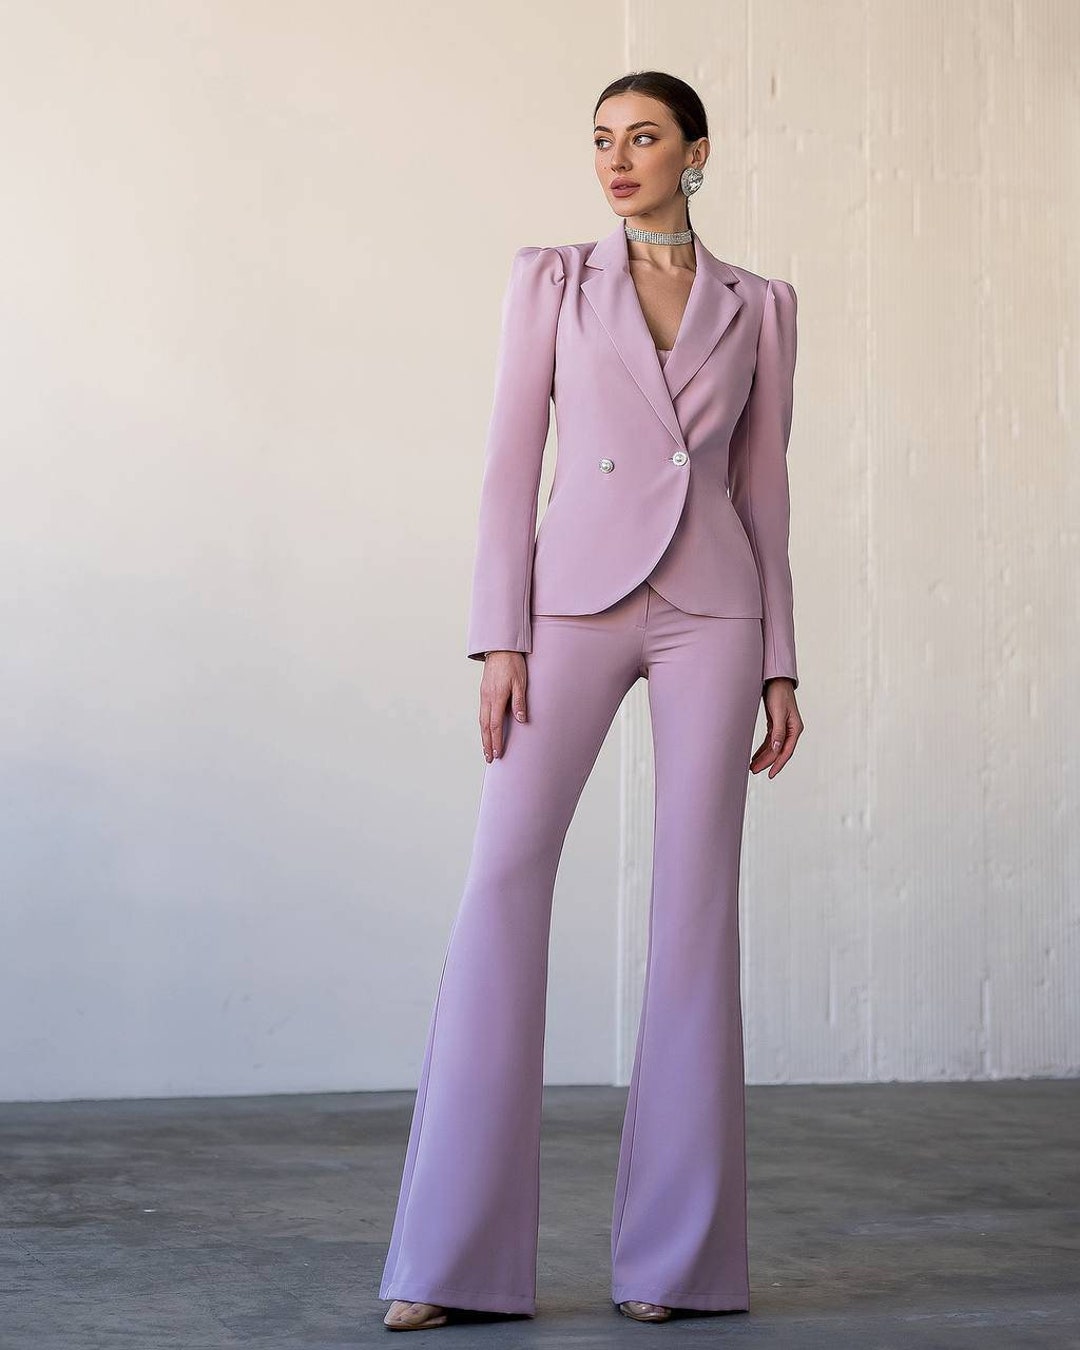 Dusty Pink Flared Pants Suit With Blazer Padded Shoulders - Etsy